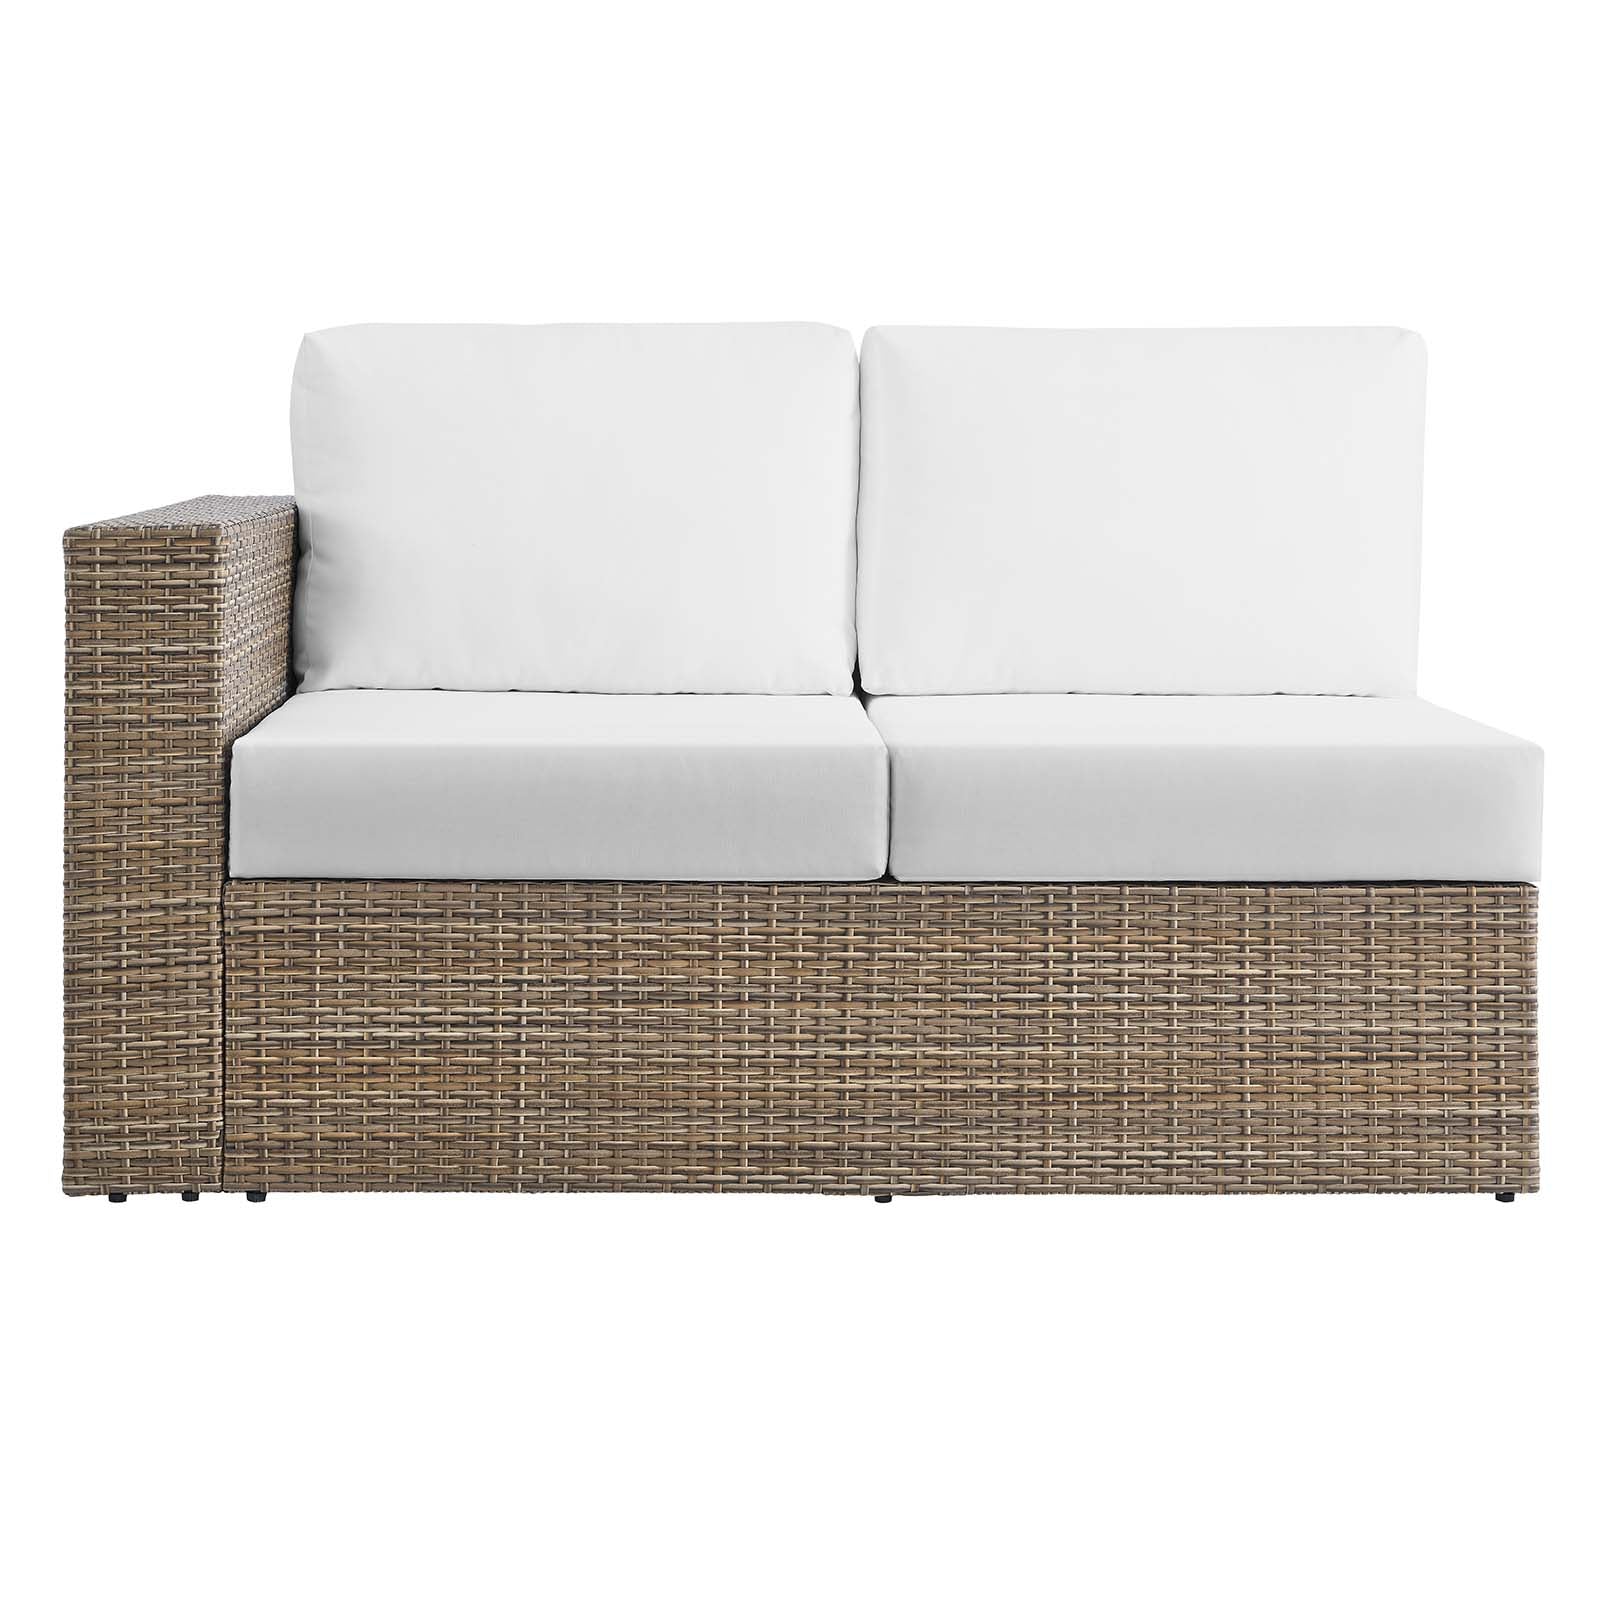 Convene Outdoor Patio Outdoor Patio L-Shaped Sectional Sofa - East Shore Modern Home Furnishings